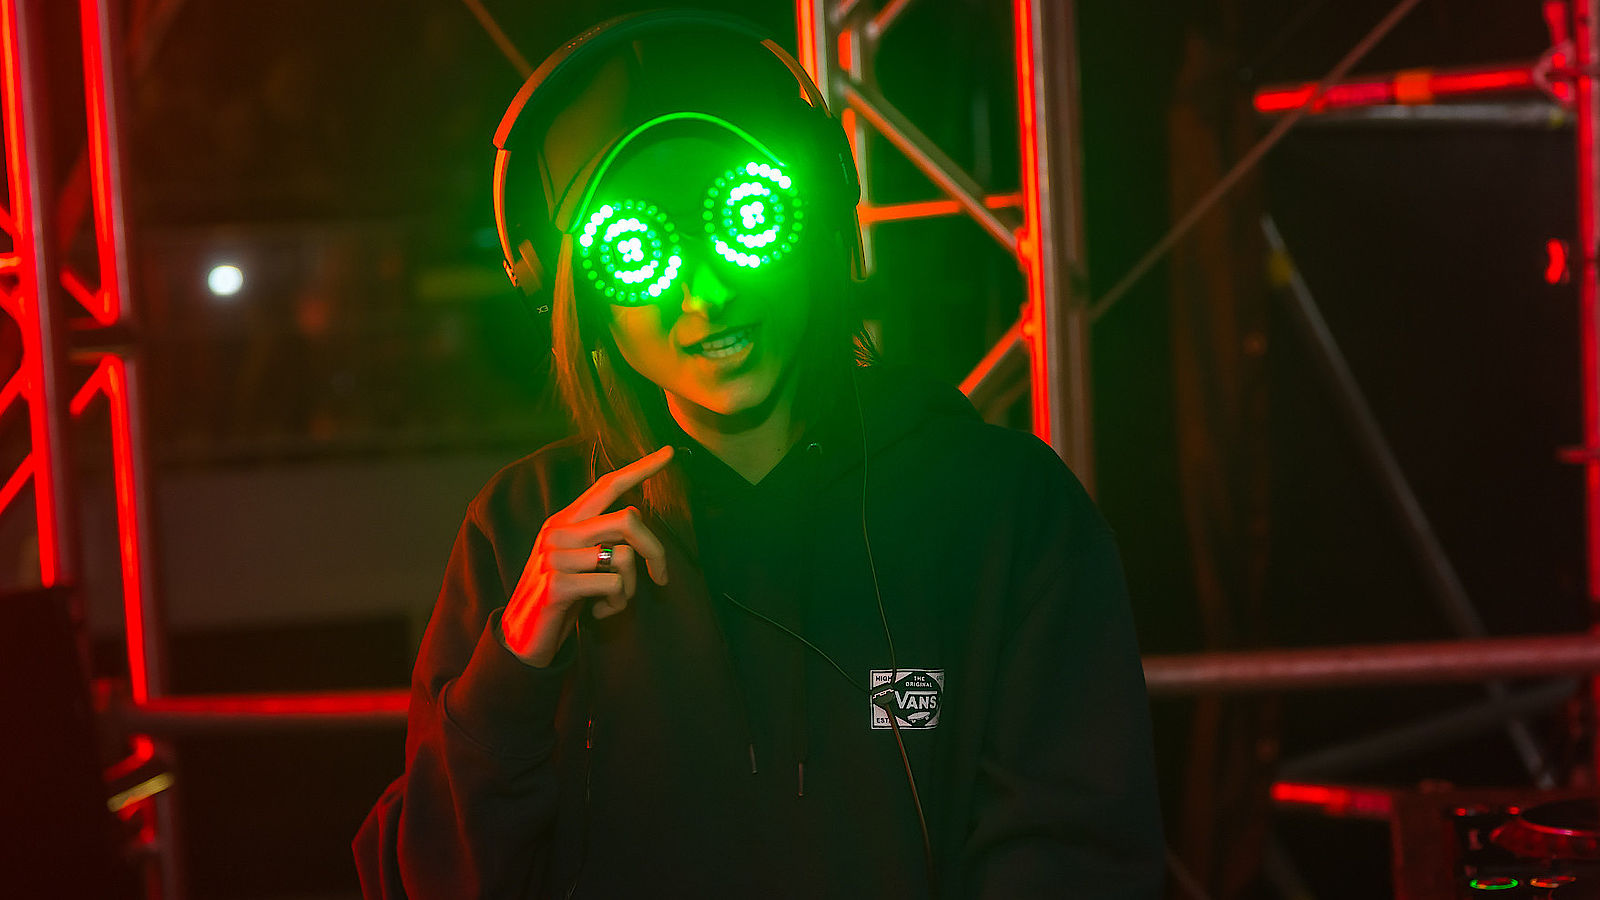 Rezz shows the first preview of her collaboration with Deadmau5